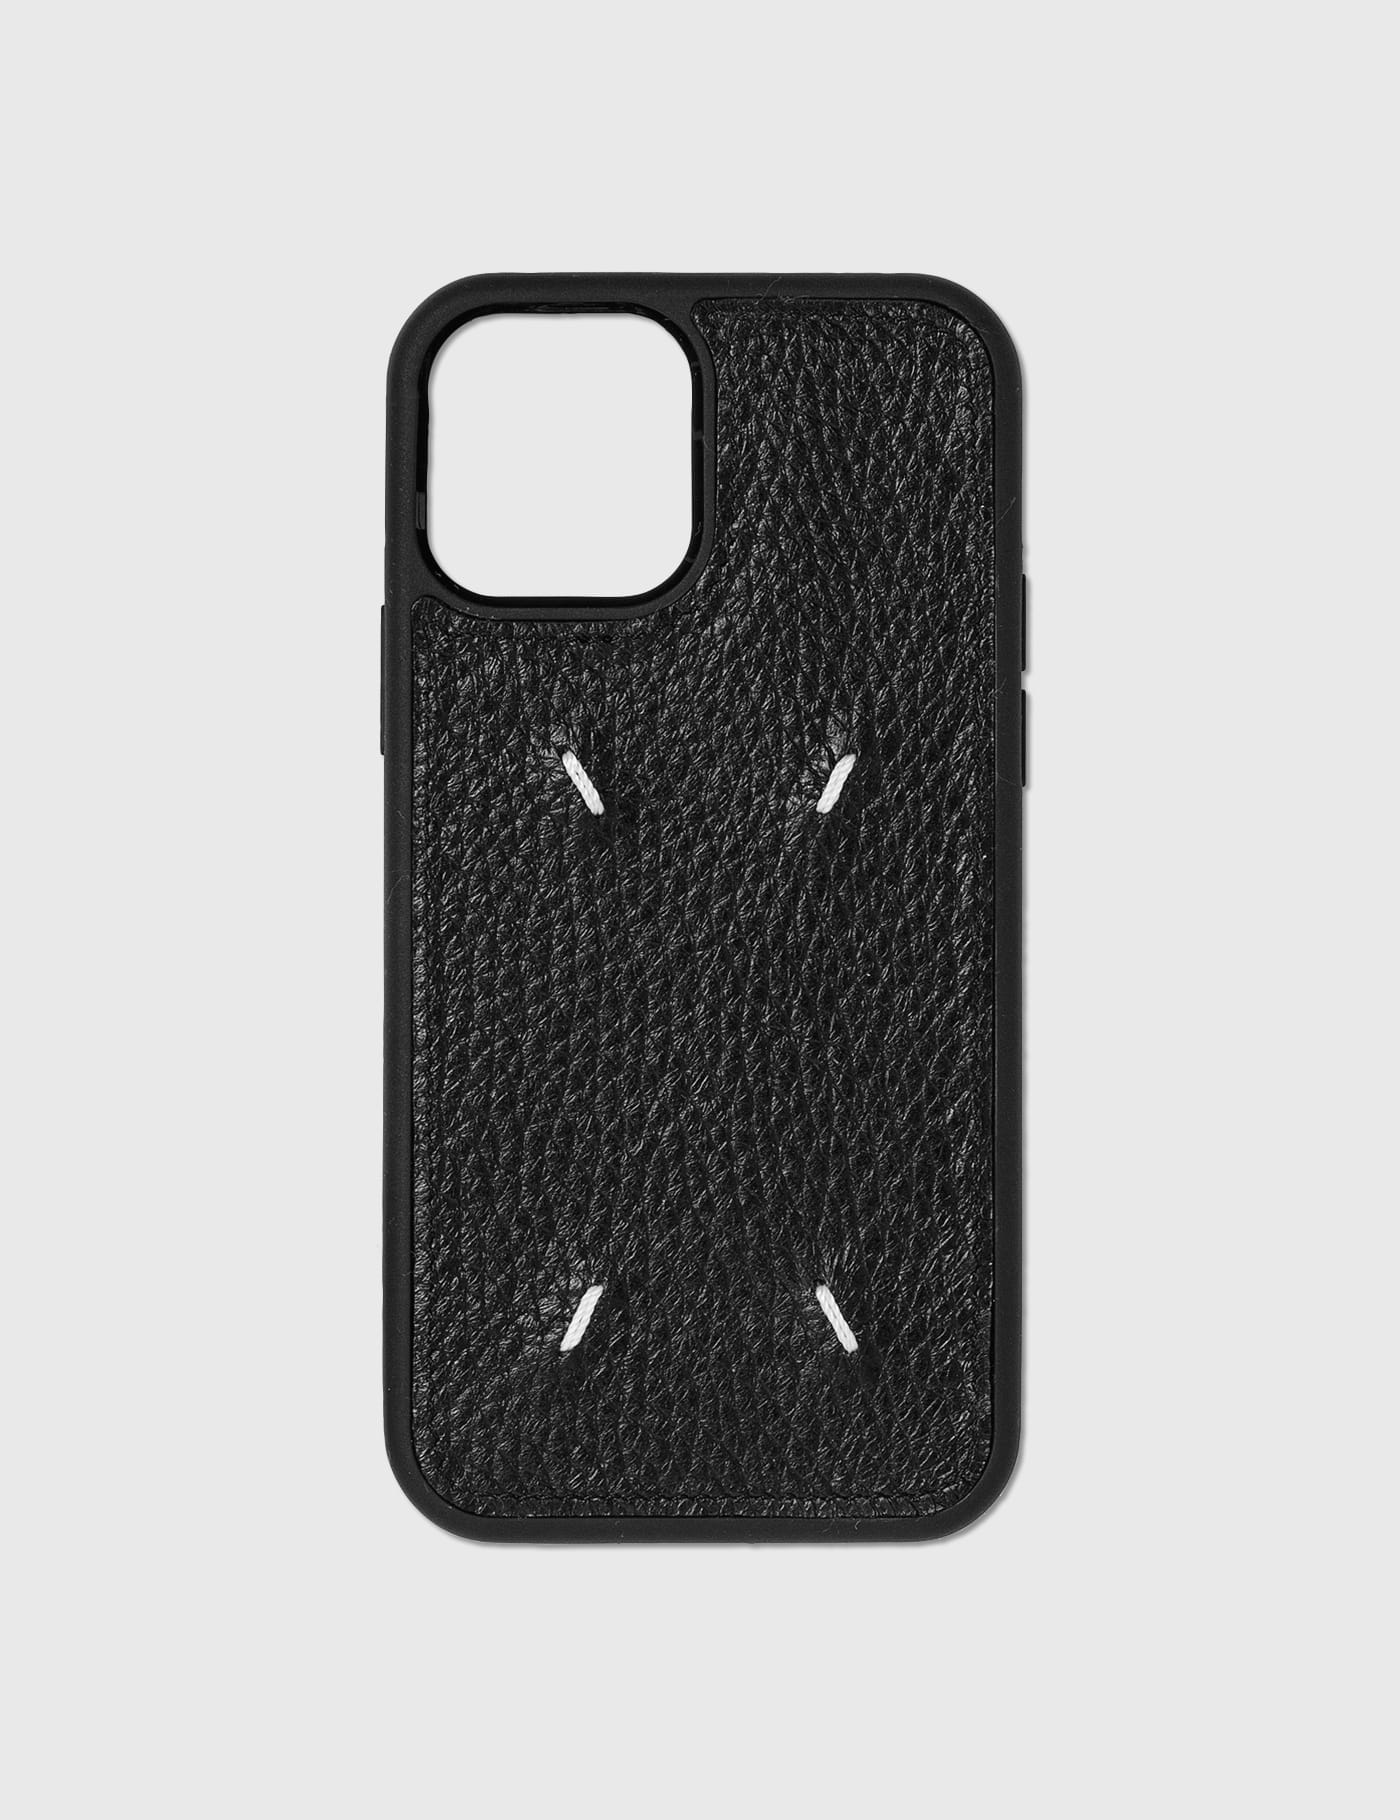 Maison Margiela - iPhone 12 Pro Max Case | HBX - Globally Curated 